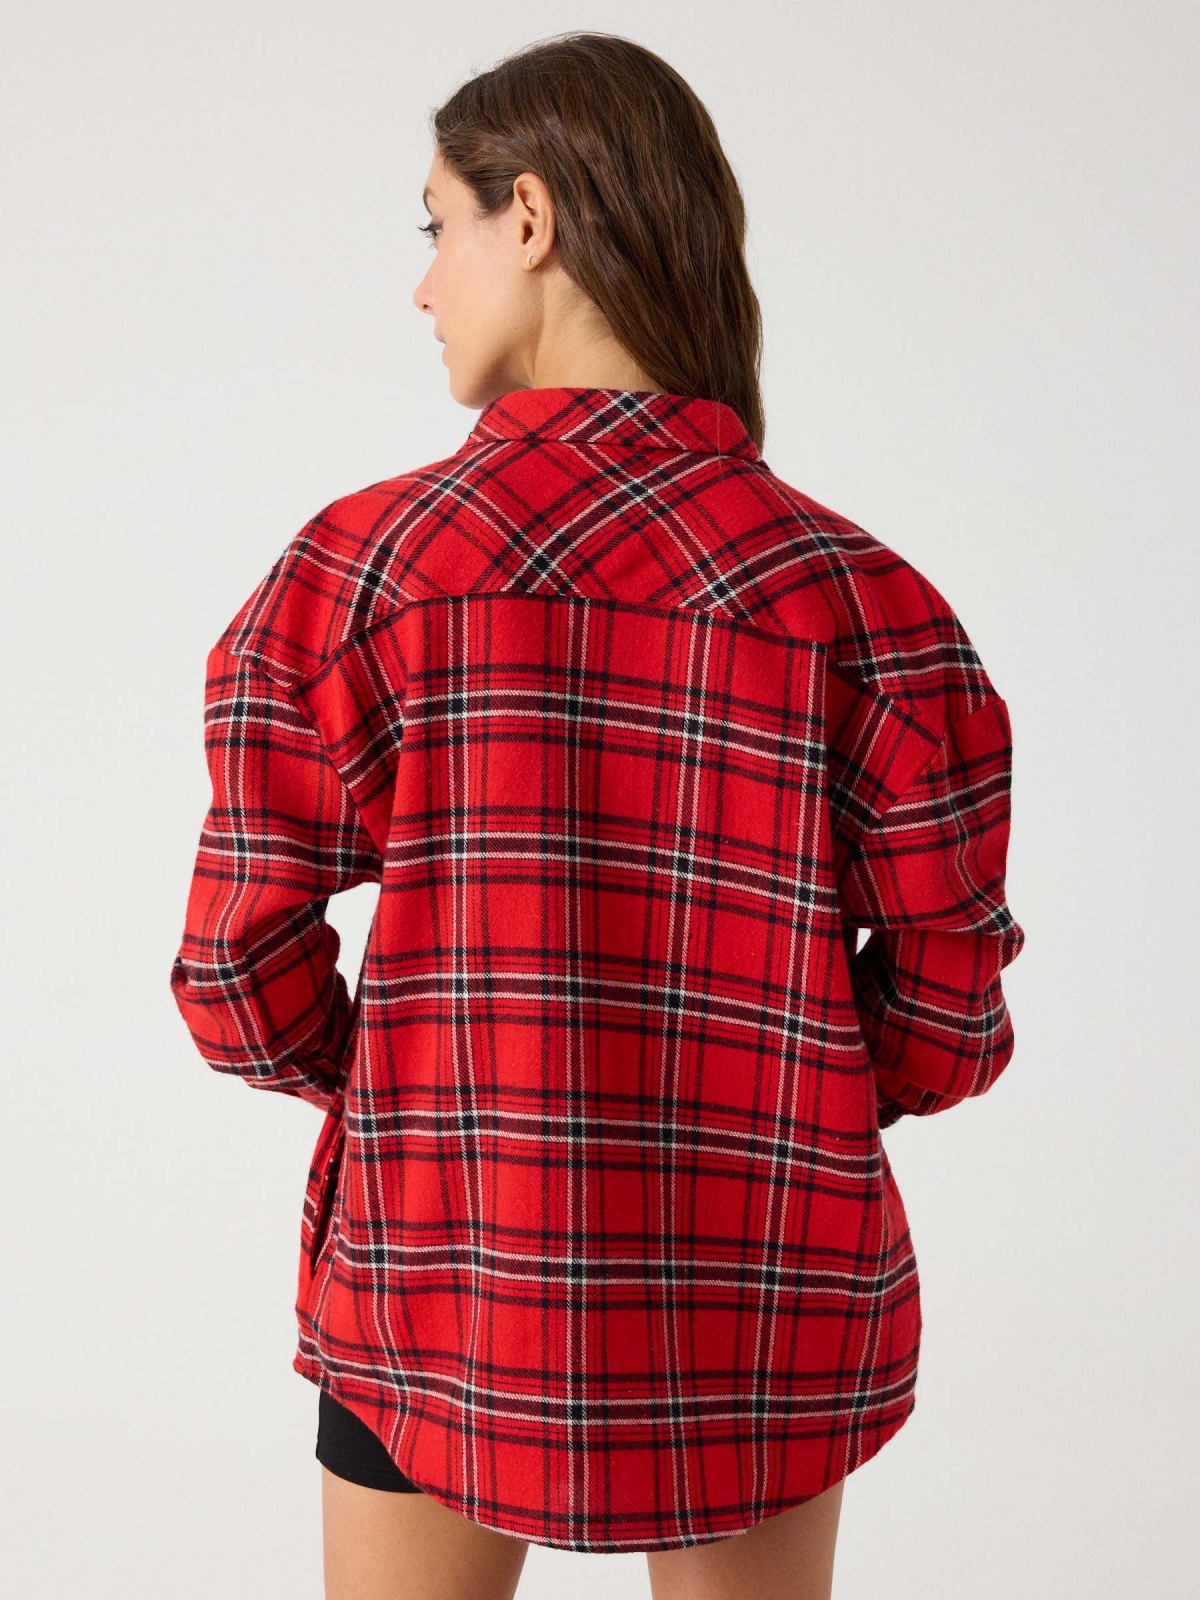 Plaid overshirt red middle back view